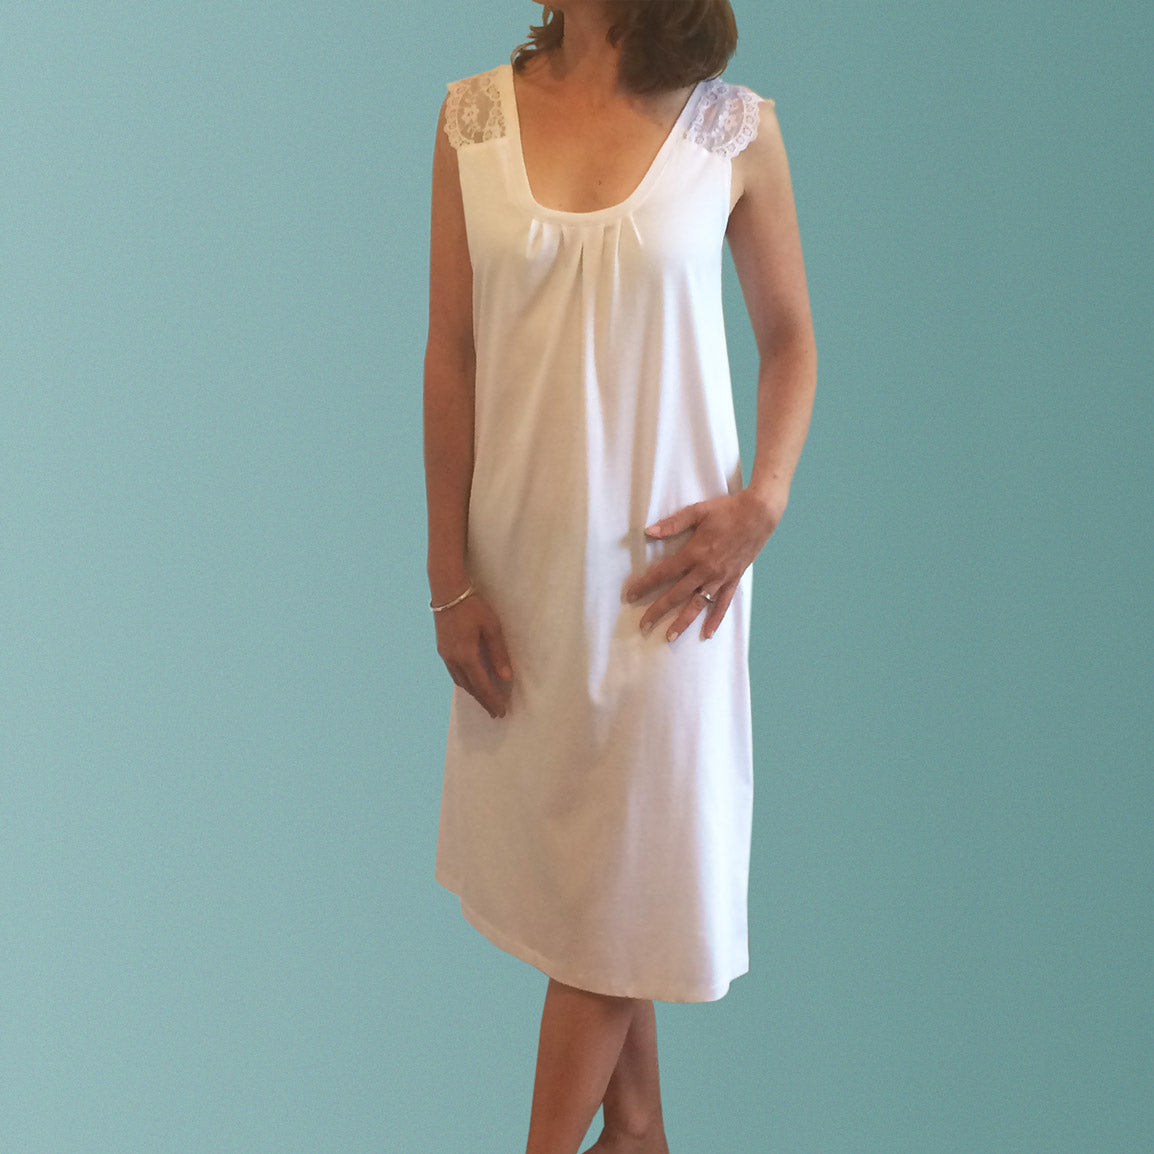 Womens nighties Australia. Cotton and lace nightgown made from certified organic cotton.